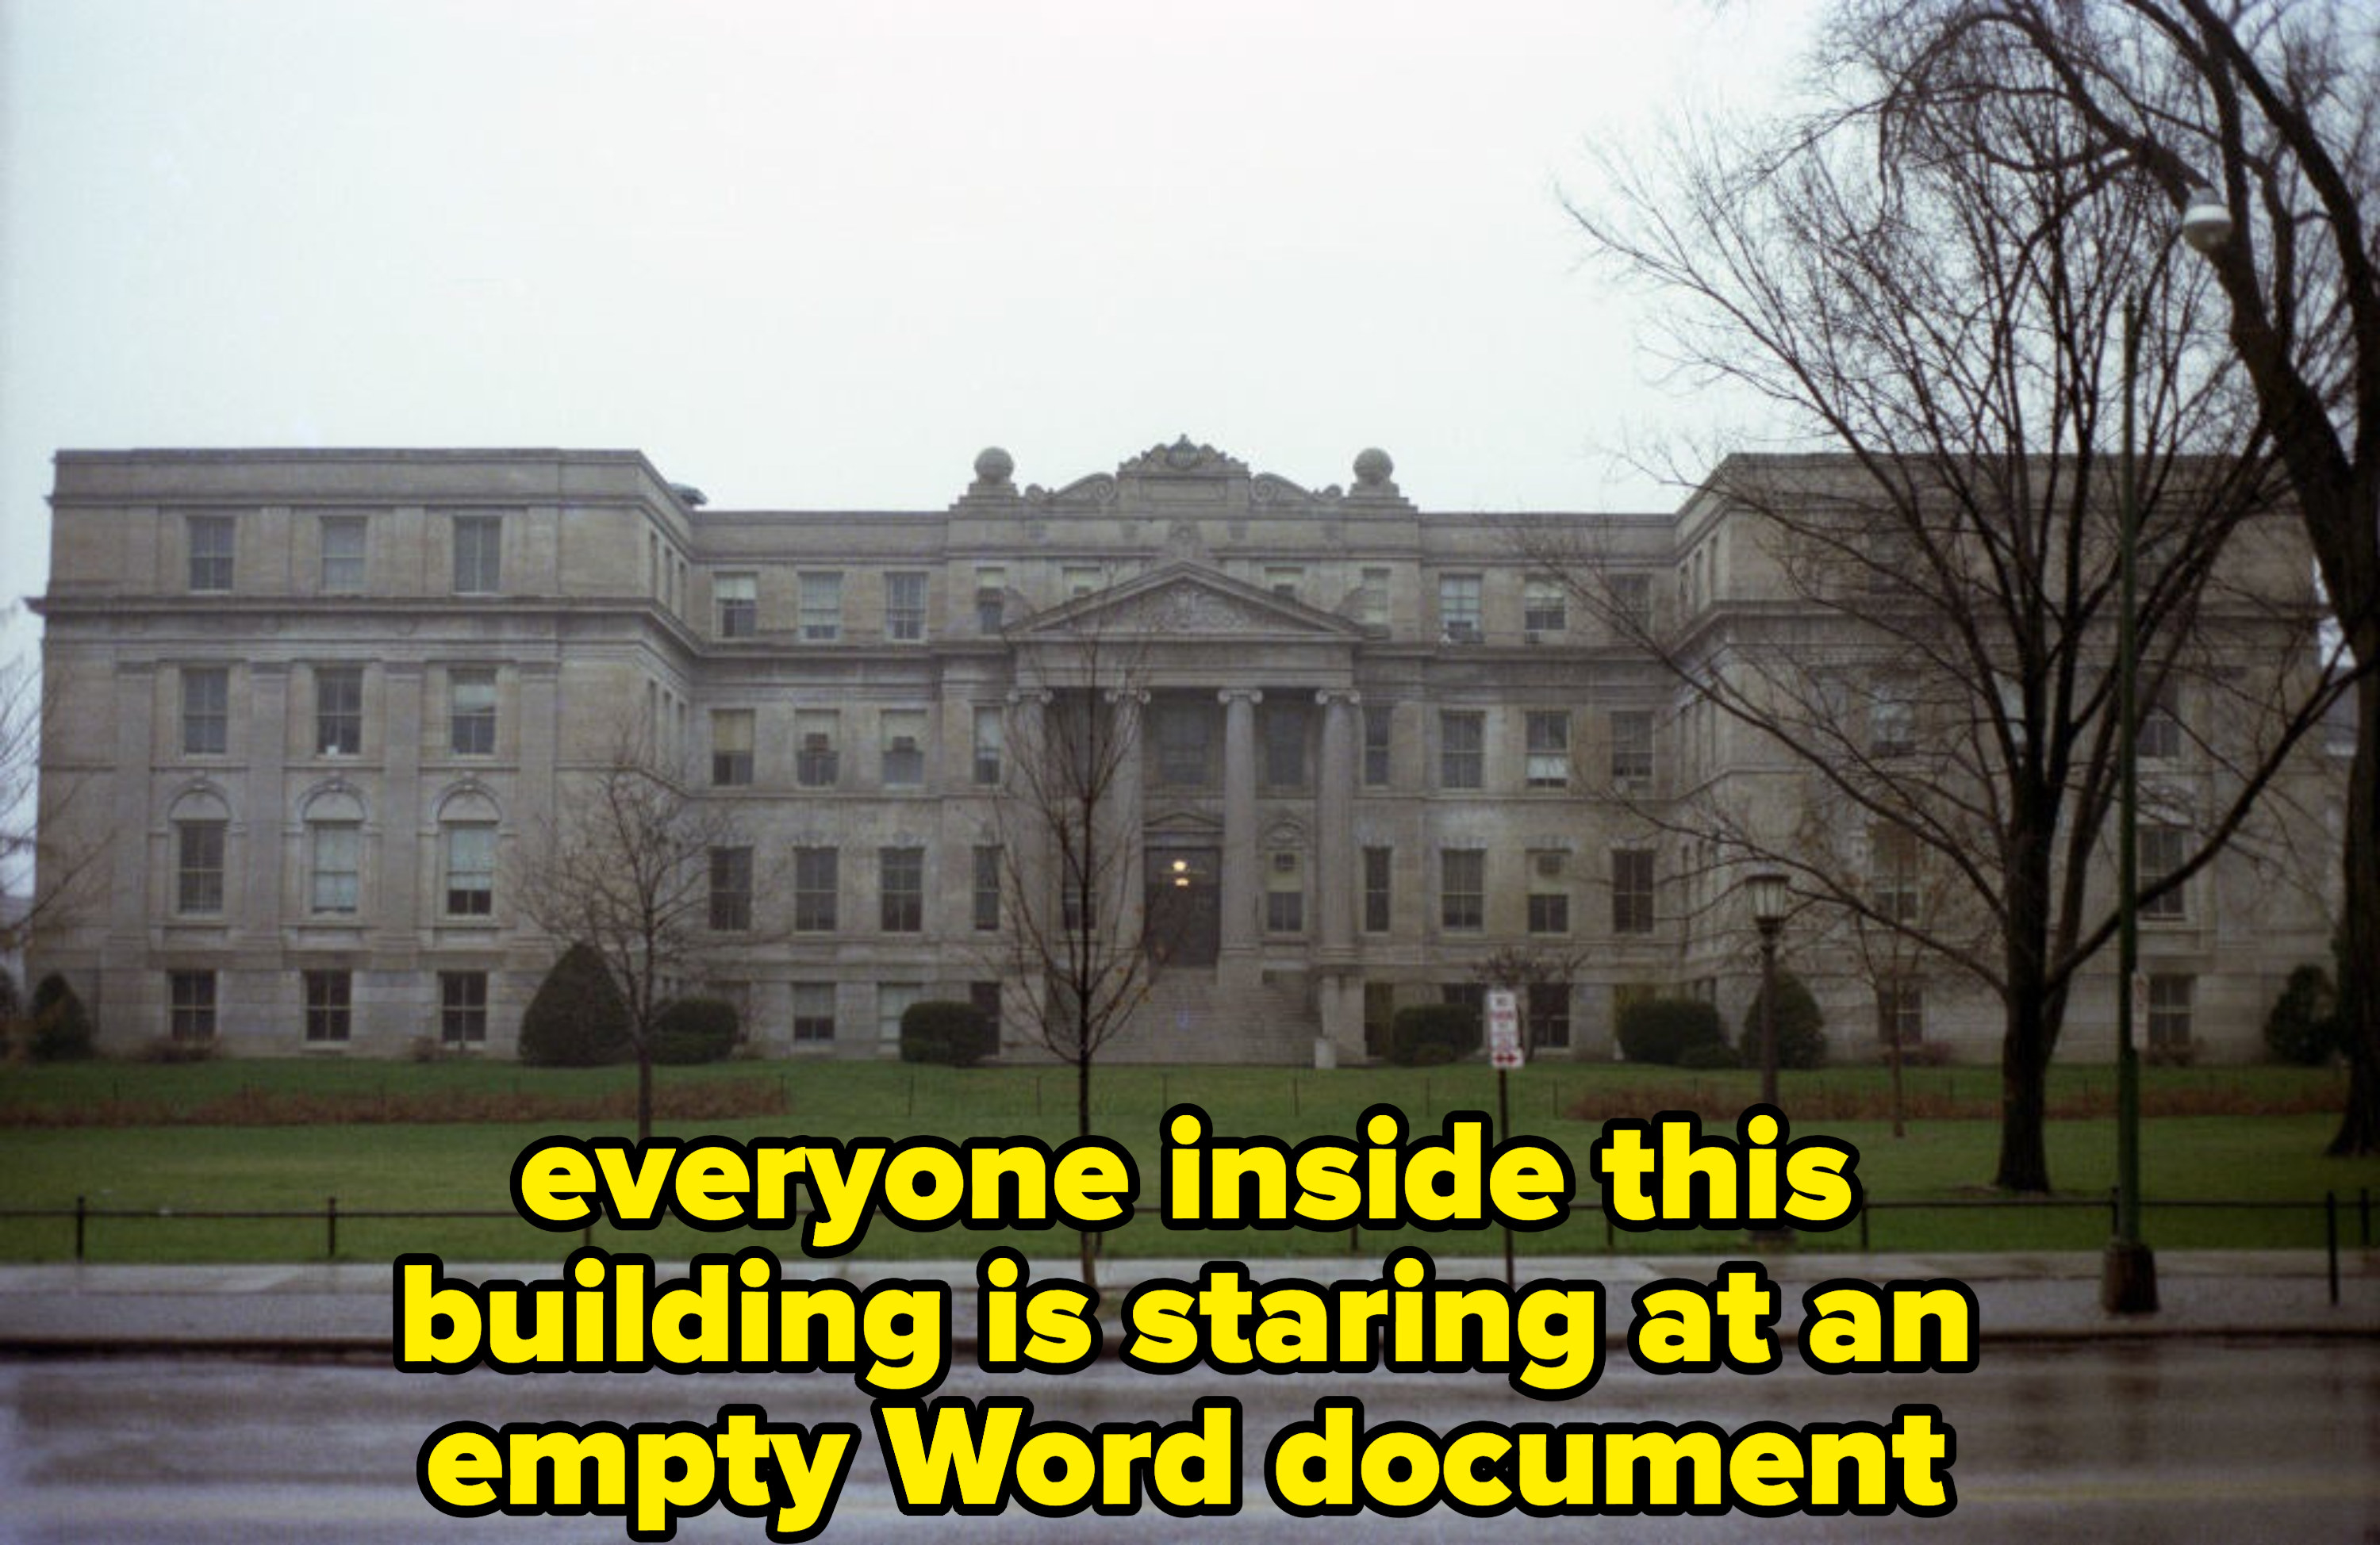 the main building of Iowa University, with caption: everyone inside this building is staring at an empty Word document